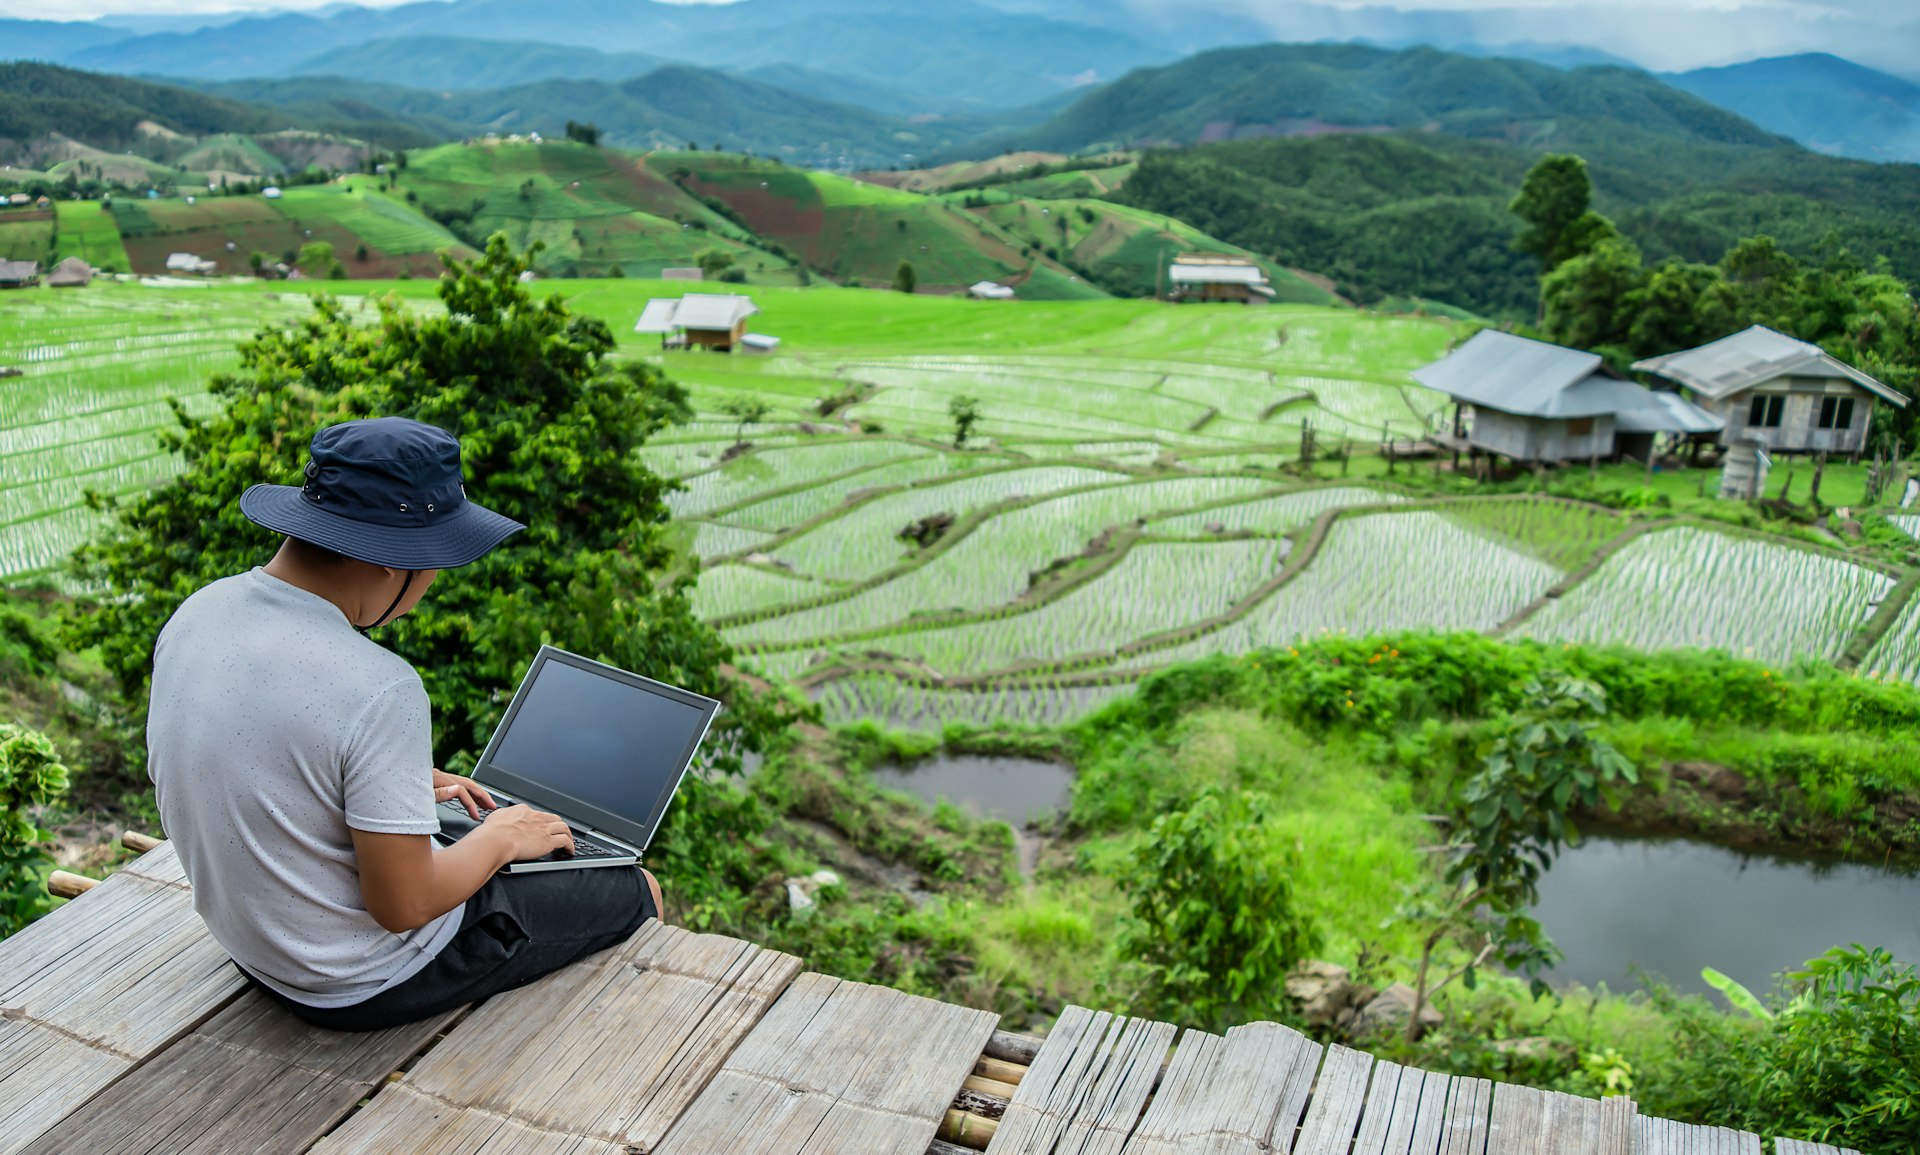 A person is typing on a laptop while sitting outside, overlooking a lush green landscape.